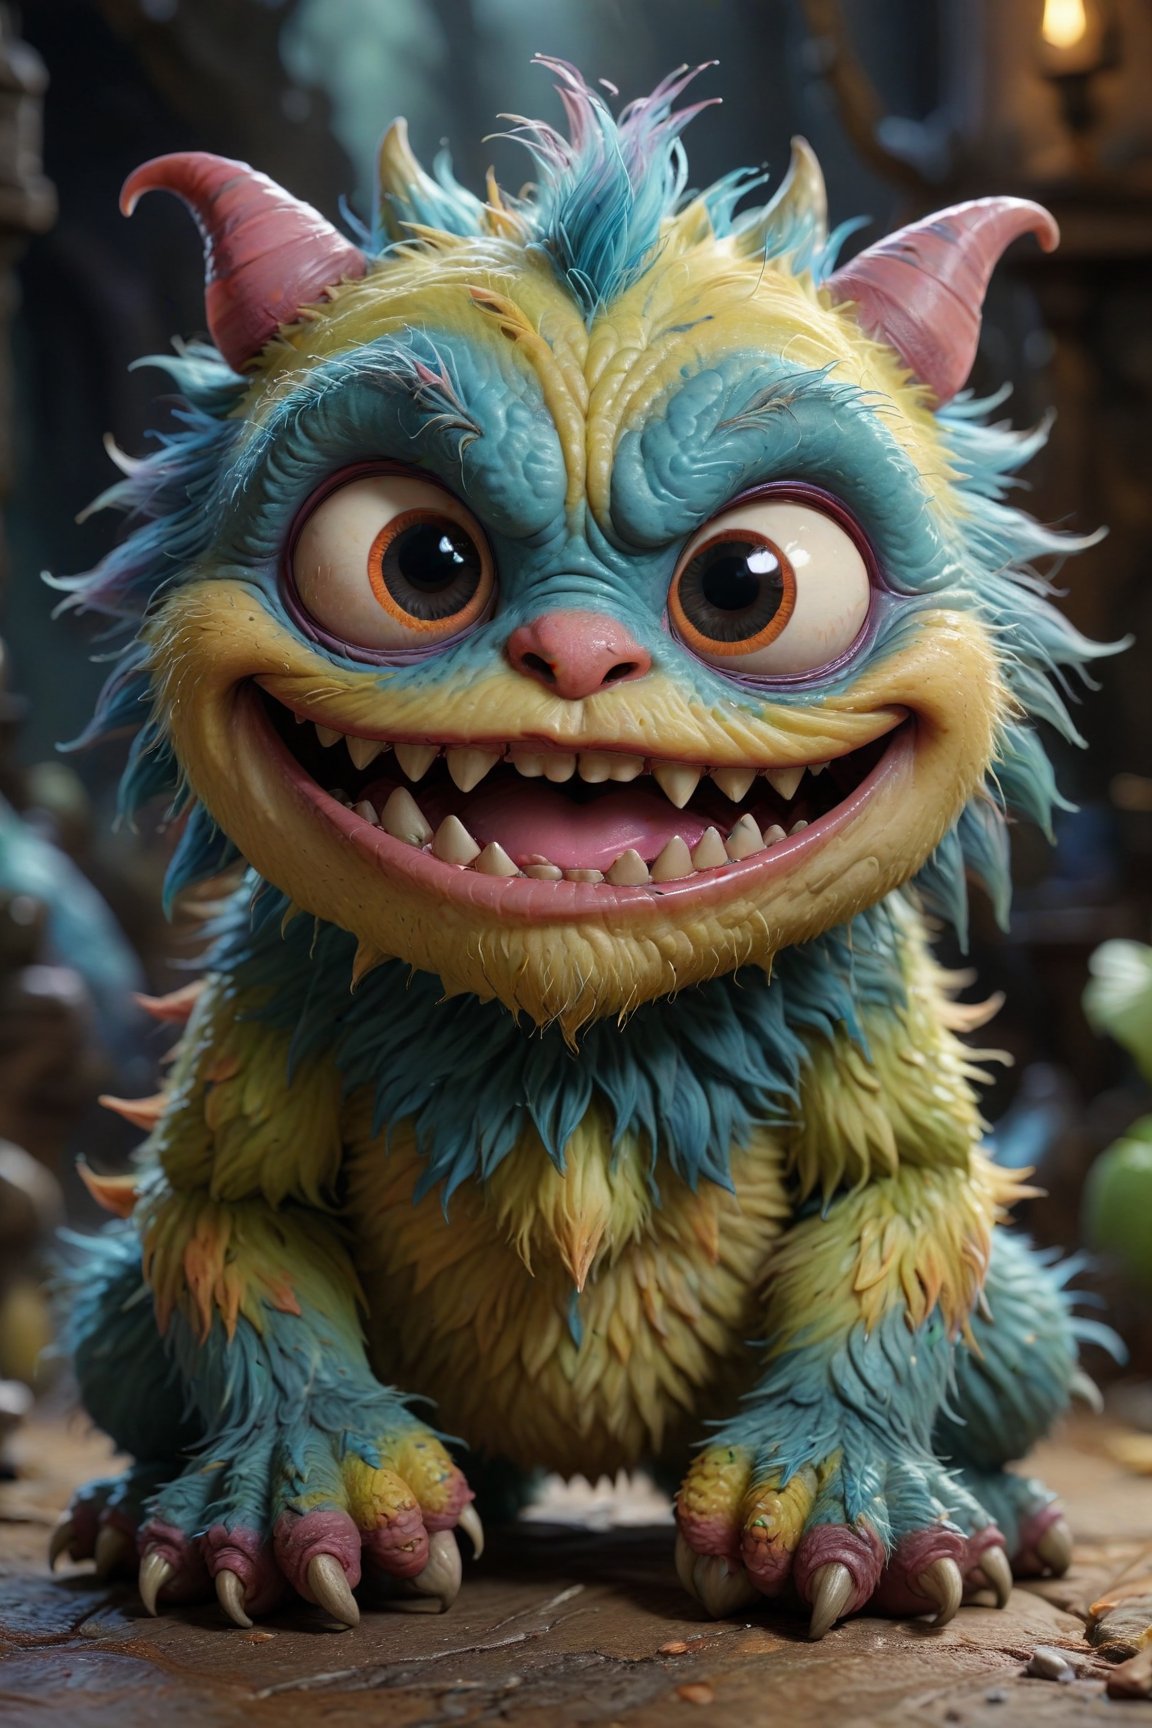 (best quality,8K,highres,masterpiece), ultra-detailed, 3D, capturing the whimsical essence of a cute, tiny monster with a distinctly creepy smile. This creature, while small in stature, boasts an array of vibrant colors and textures, making it stand out with its unique charm. Despite its eerie grin, there's an undeniable allure to its appearance, blending elements of the adorable with the slightly unsettling. The monster's eyes sparkle with mischief, suggesting a playful nature behind its unnerving smile. Its skin is highly textured, showcasing an array of soft, pastel shades that contrast with the darker, more mysterious tones of its grin. The background is deliberately blurred, focusing attention on the creature's expressive face and the intricate details that define its character. This portrayal combines the innocent with the eerie, inviting viewers into a world where even the smallest monsters carry a mix of cuteness and mystery.